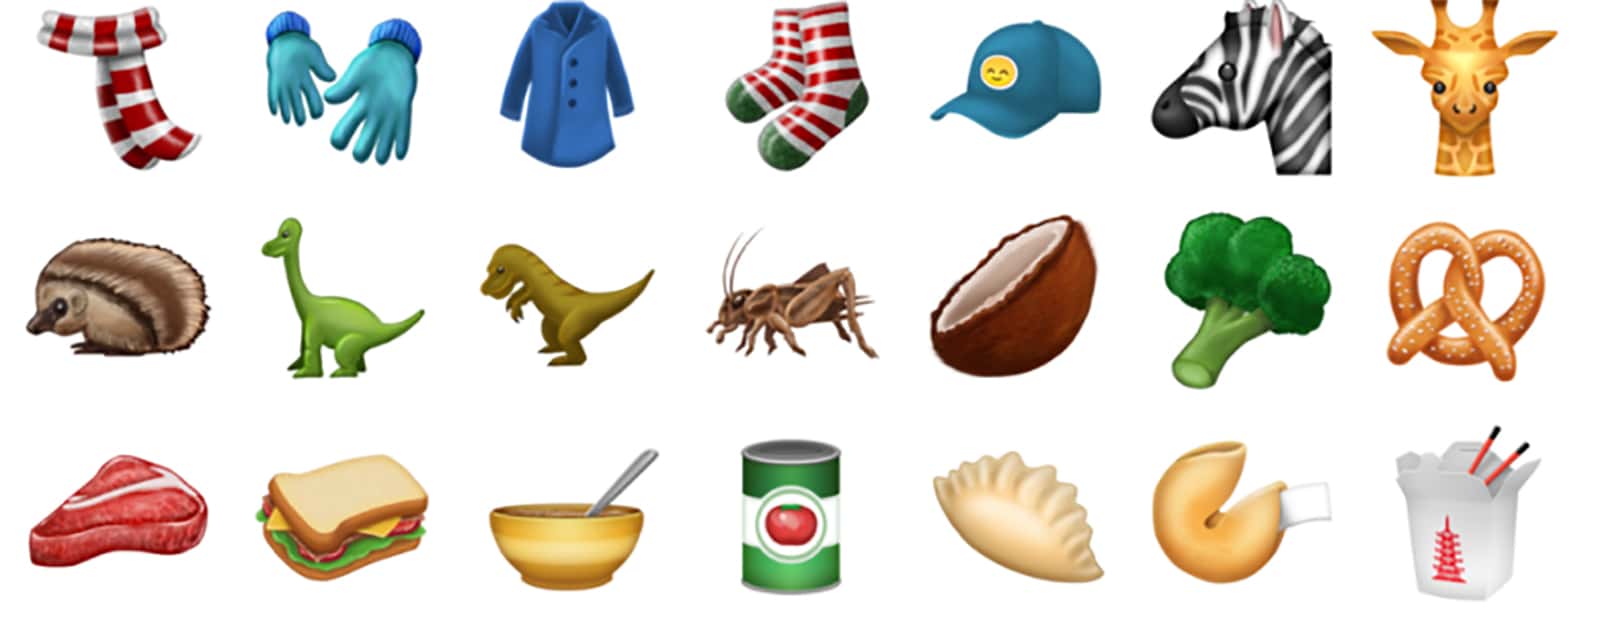 Coming Soon To Your iPhone: Over 70 New Unicode 10 Emojis